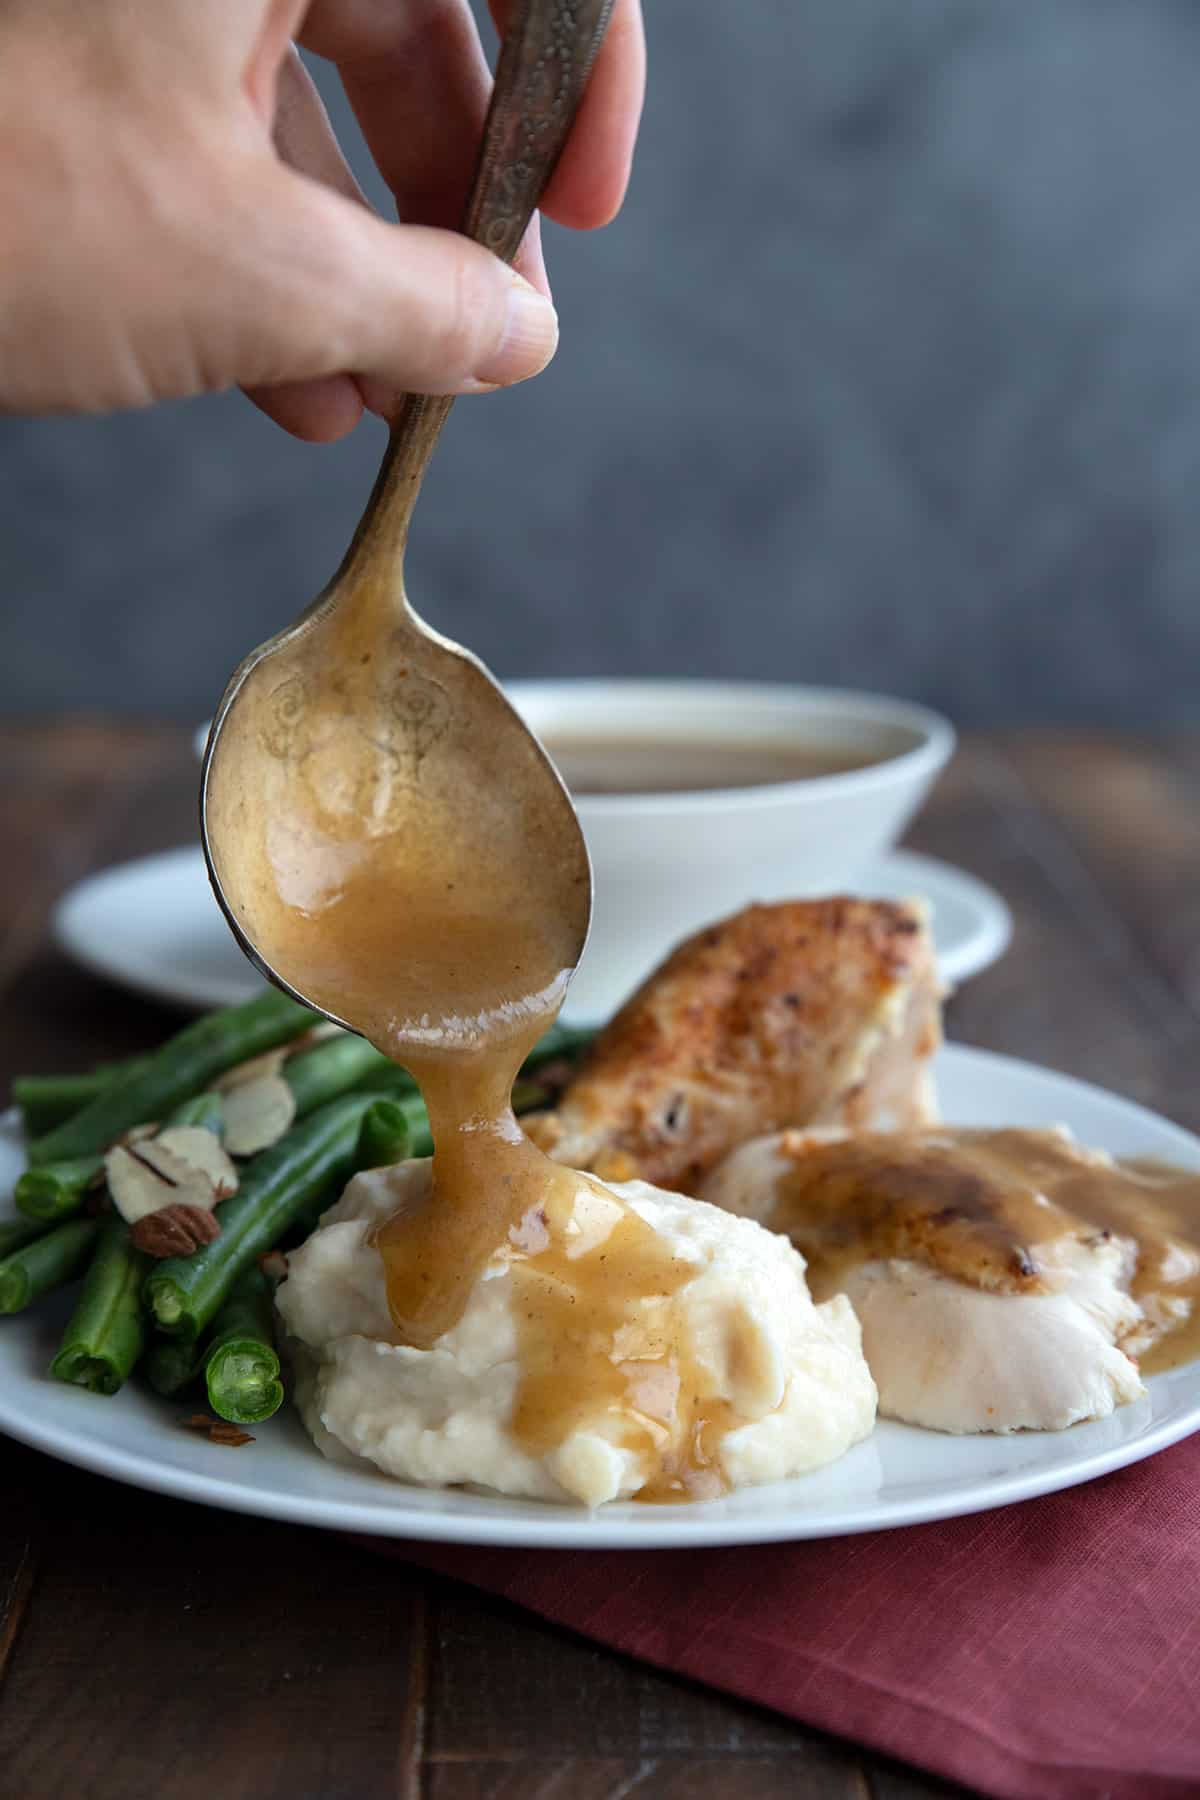 Keto gravy being poured over a plate of turkey, mashed cauliflower, and green beans.